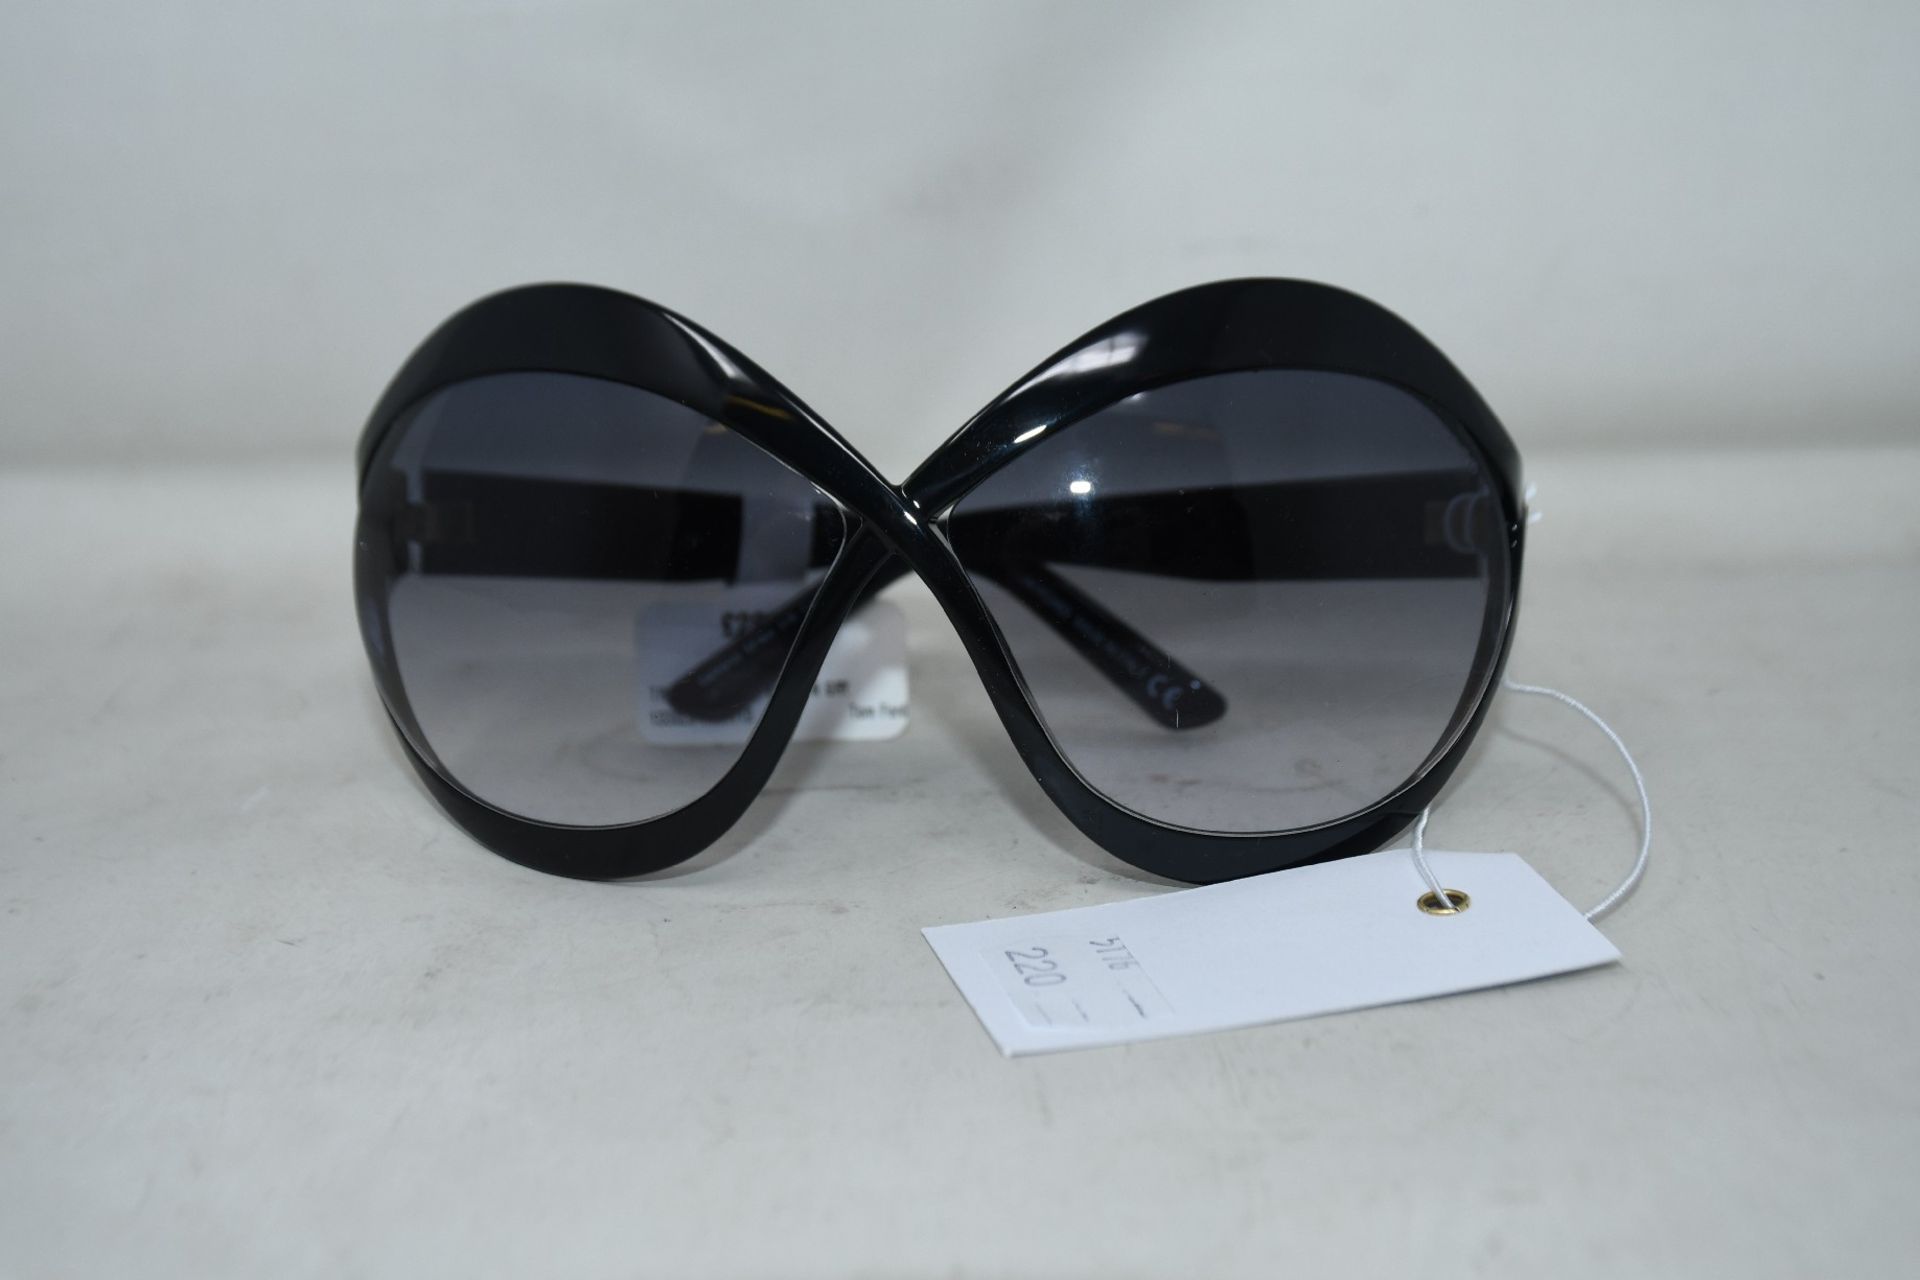 A pair of as new Tom Ford sunglasses (No case - RRP £285).